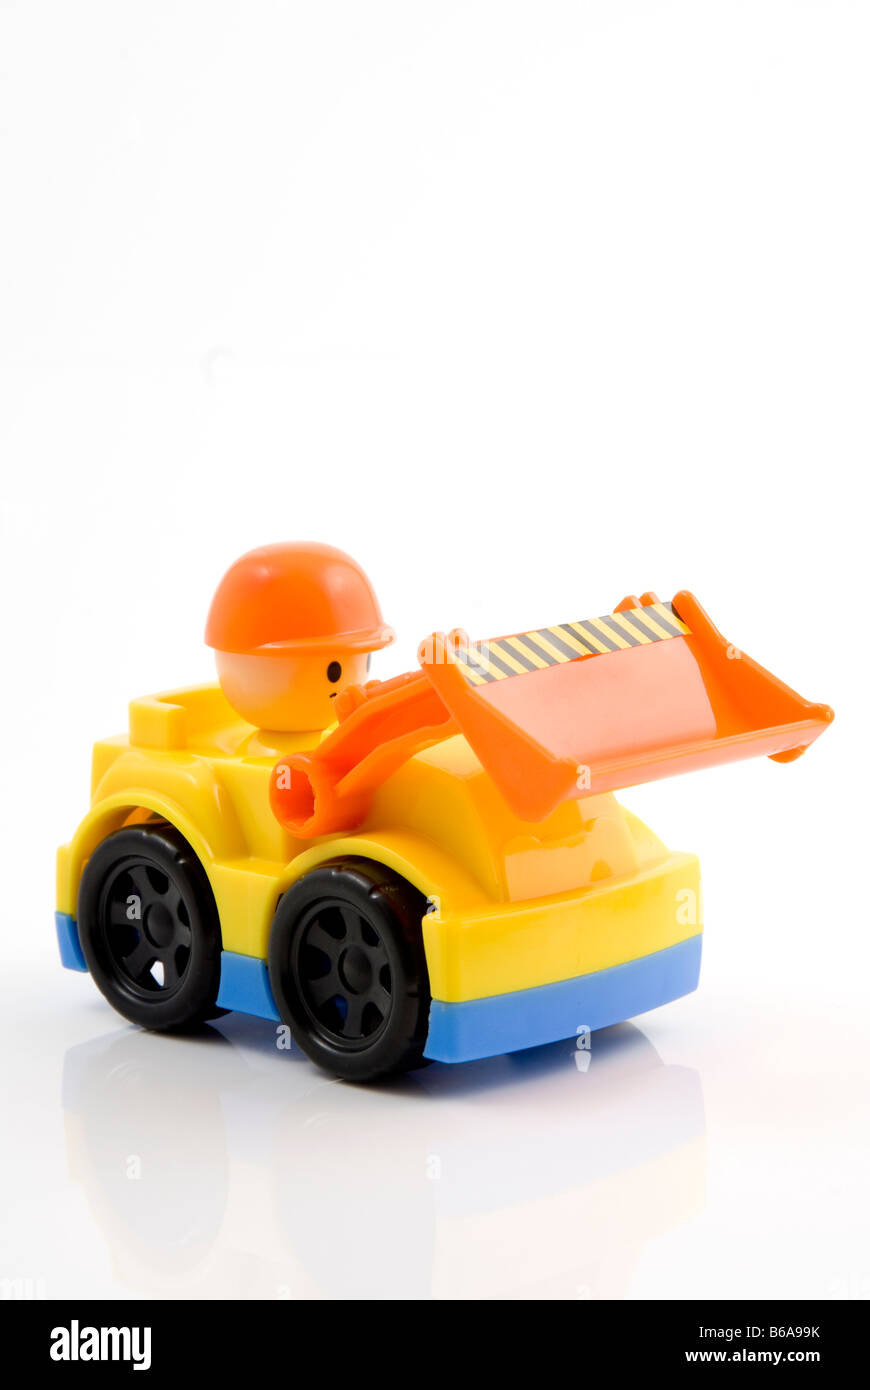 plastic toy digger truck Stock Photo